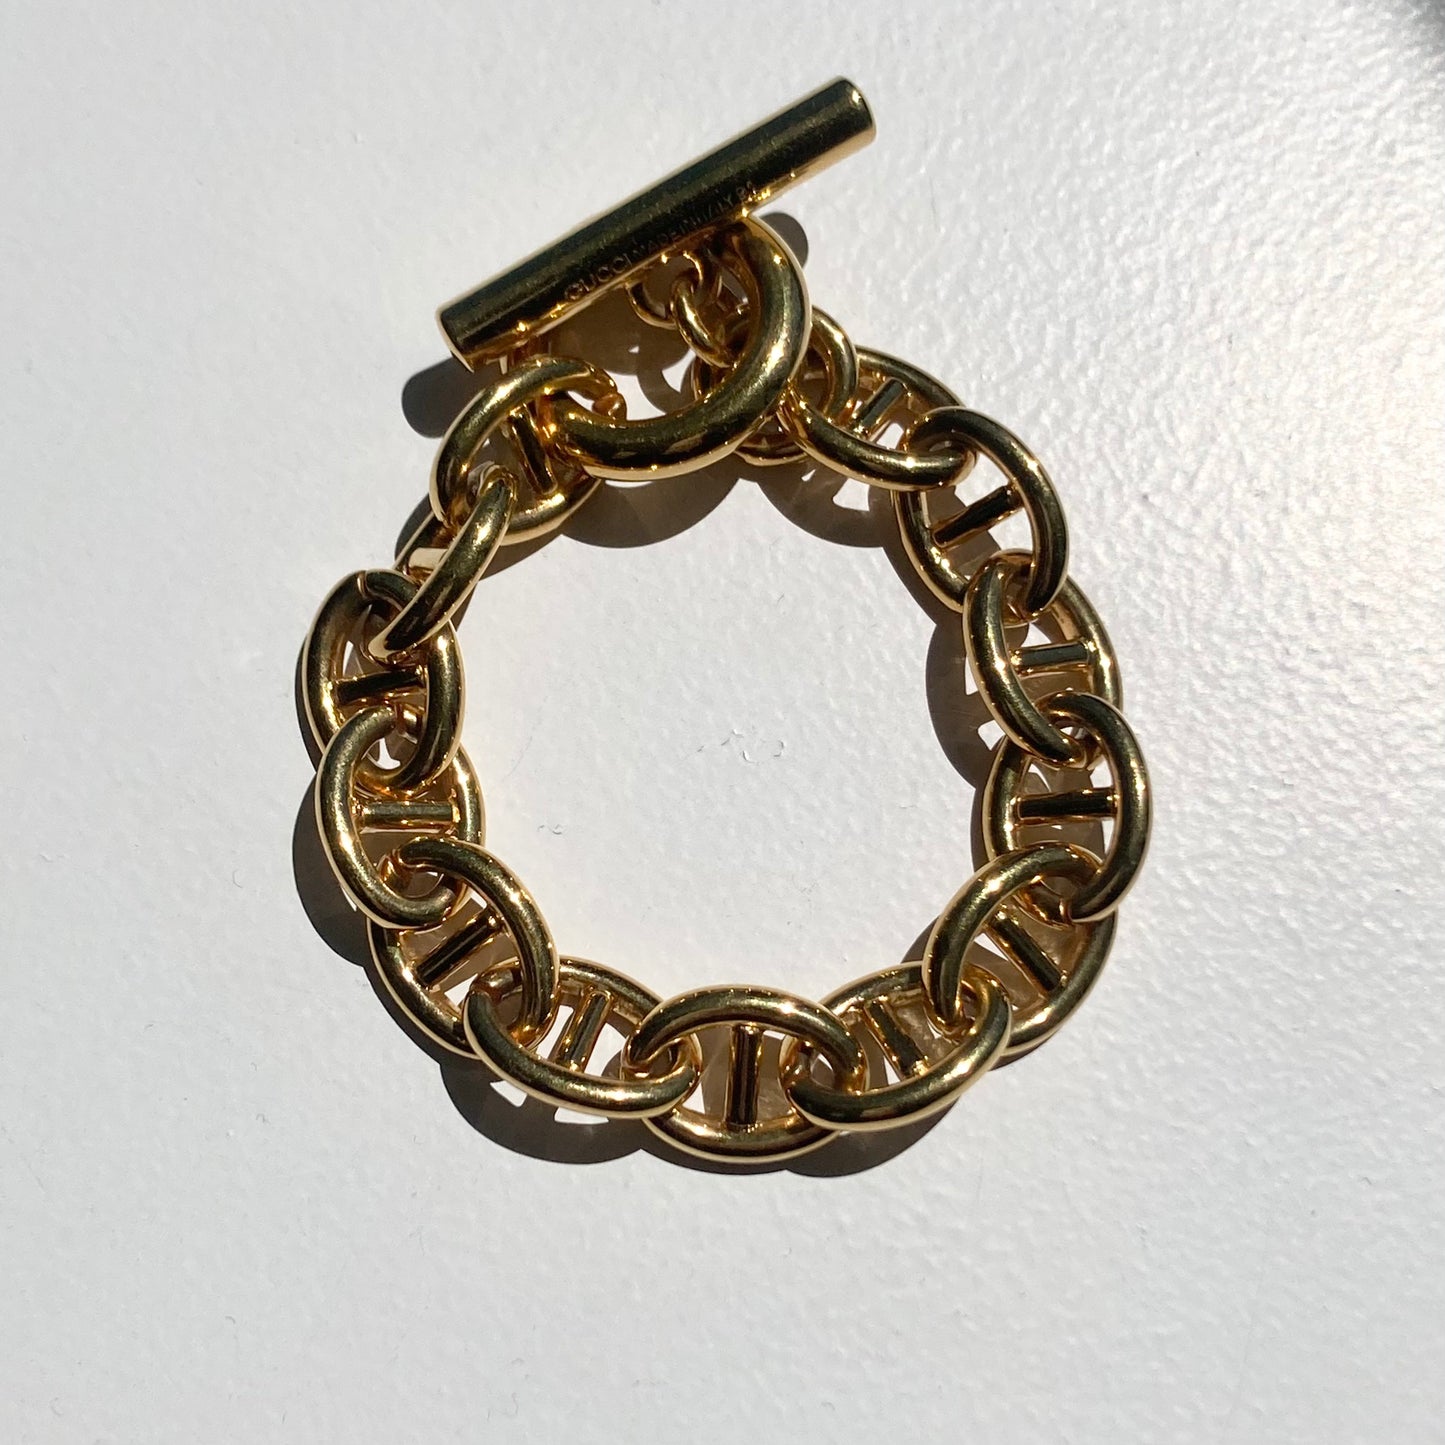 91s GUCCI by TOMFORD Anchor Chain bracelet vintage